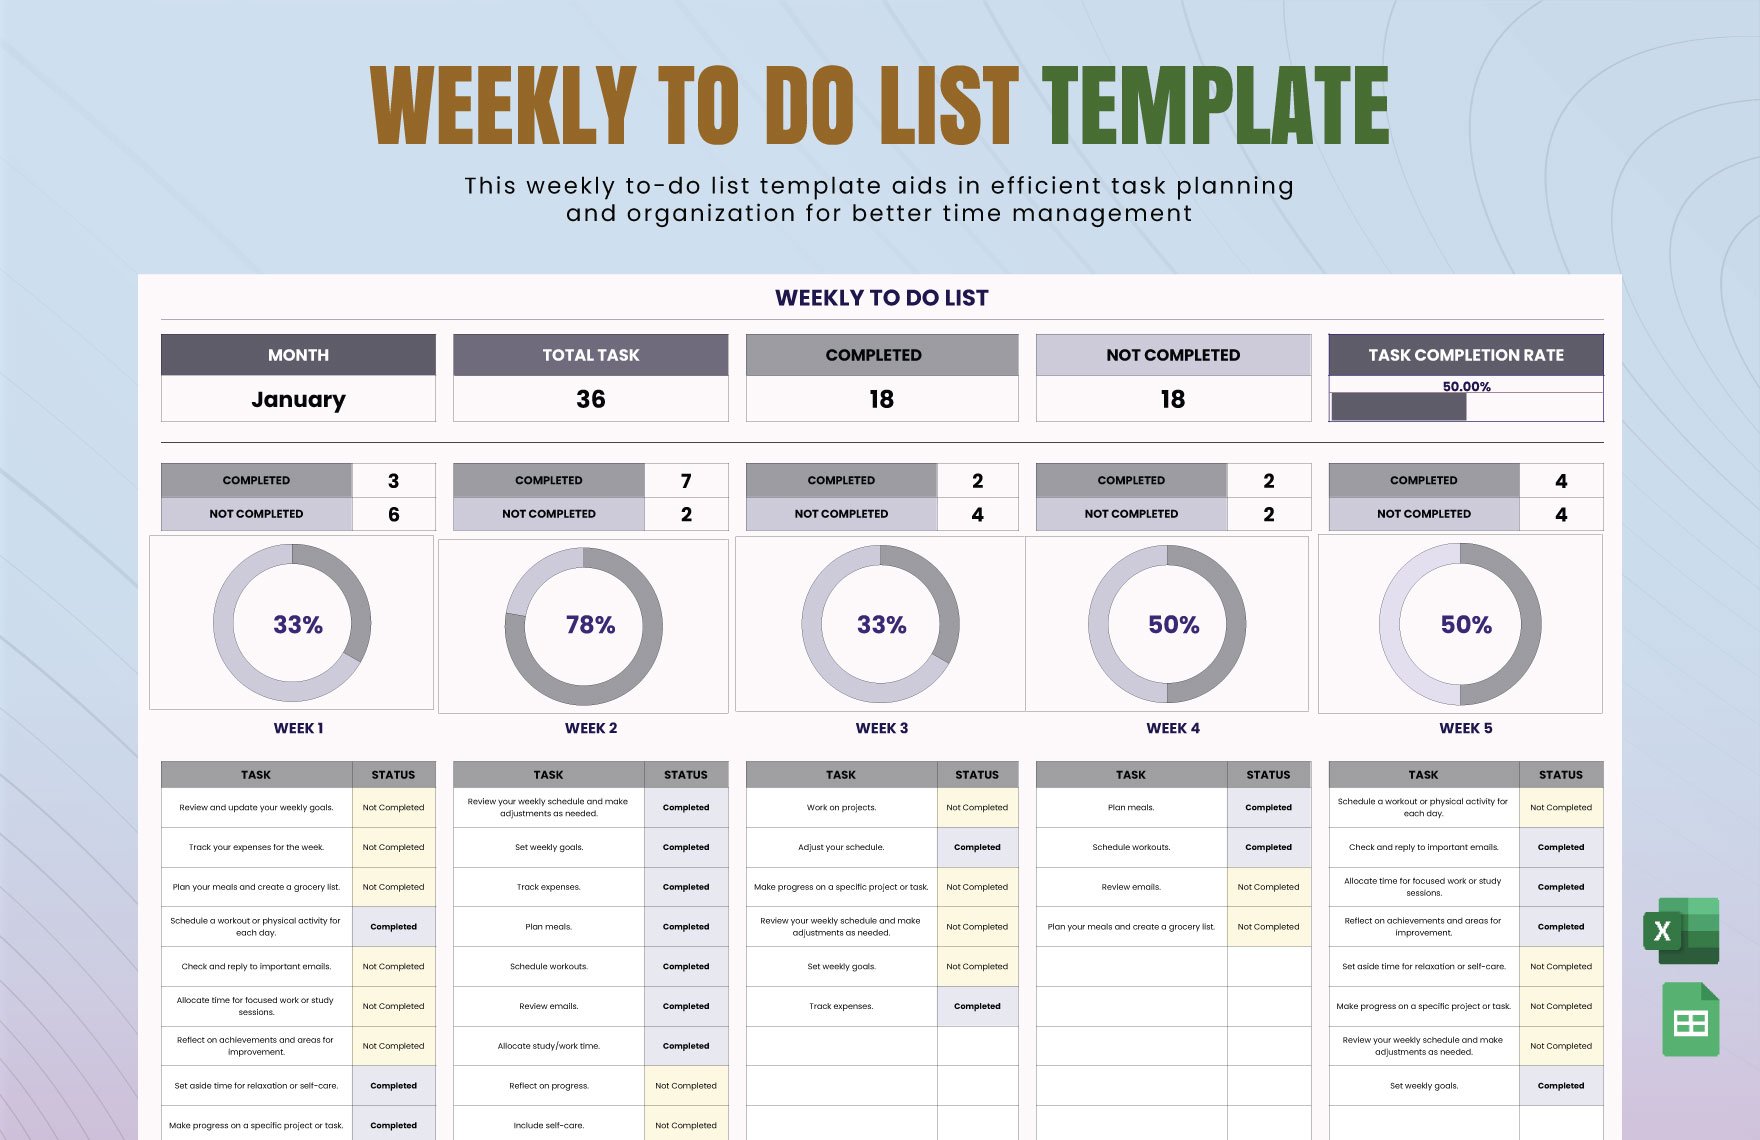 Weekly To Do List Template